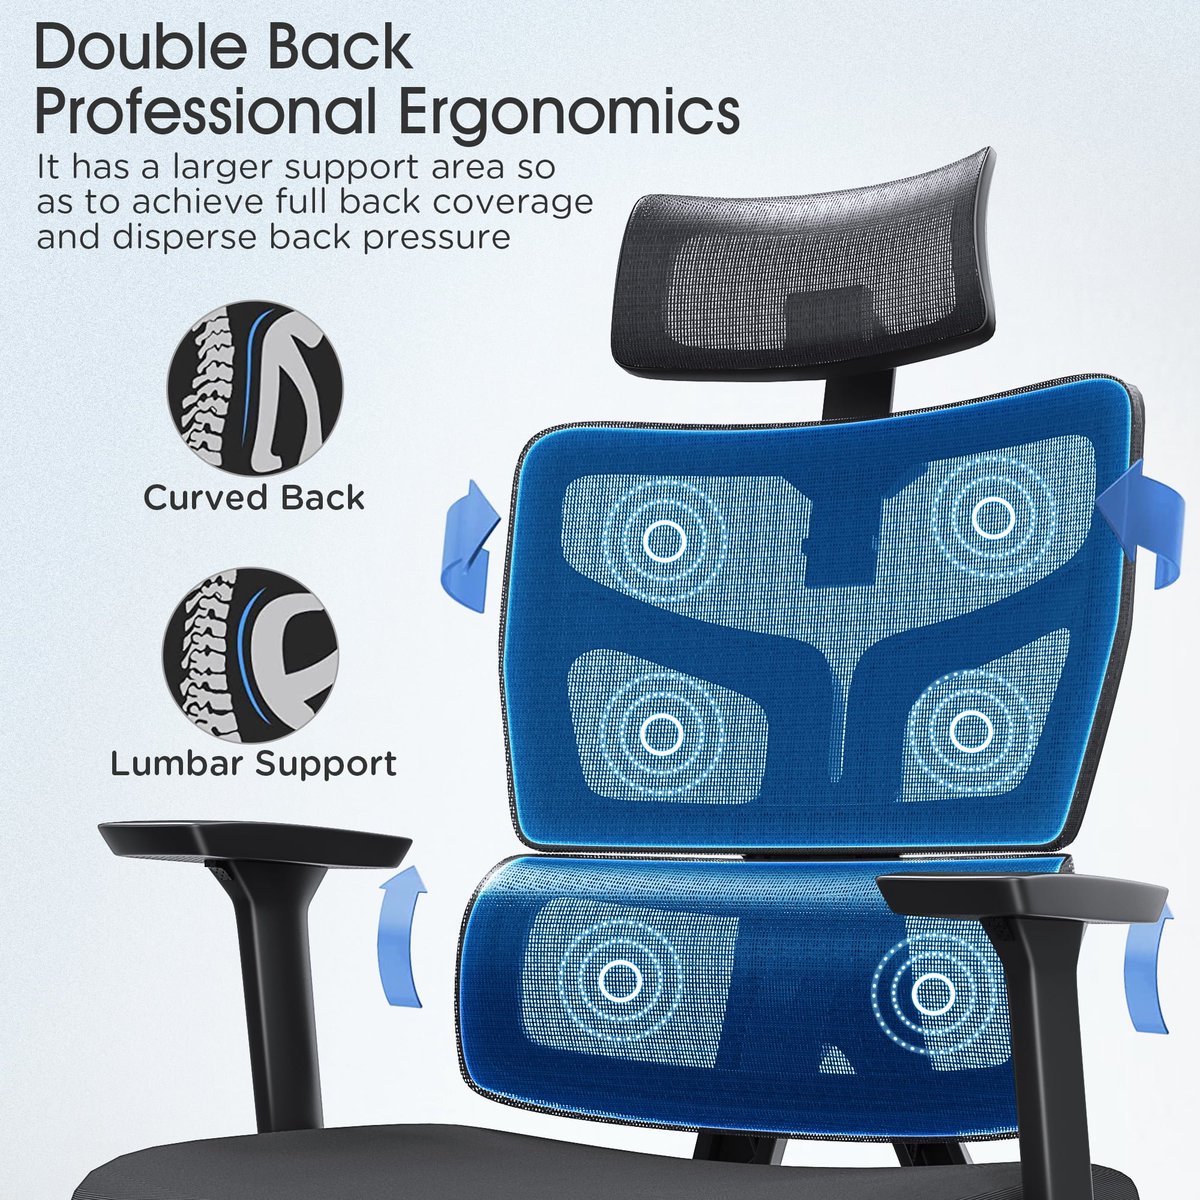 High Back Desk Chair - Adjustable Headrest, 3D Self-adaptive Lumbar Support

sovrn.co/c5scfxx

Save $280.00

#giftsforhim #giftsfordad #giftsformom #ChristmasGift #OfficeFurniture